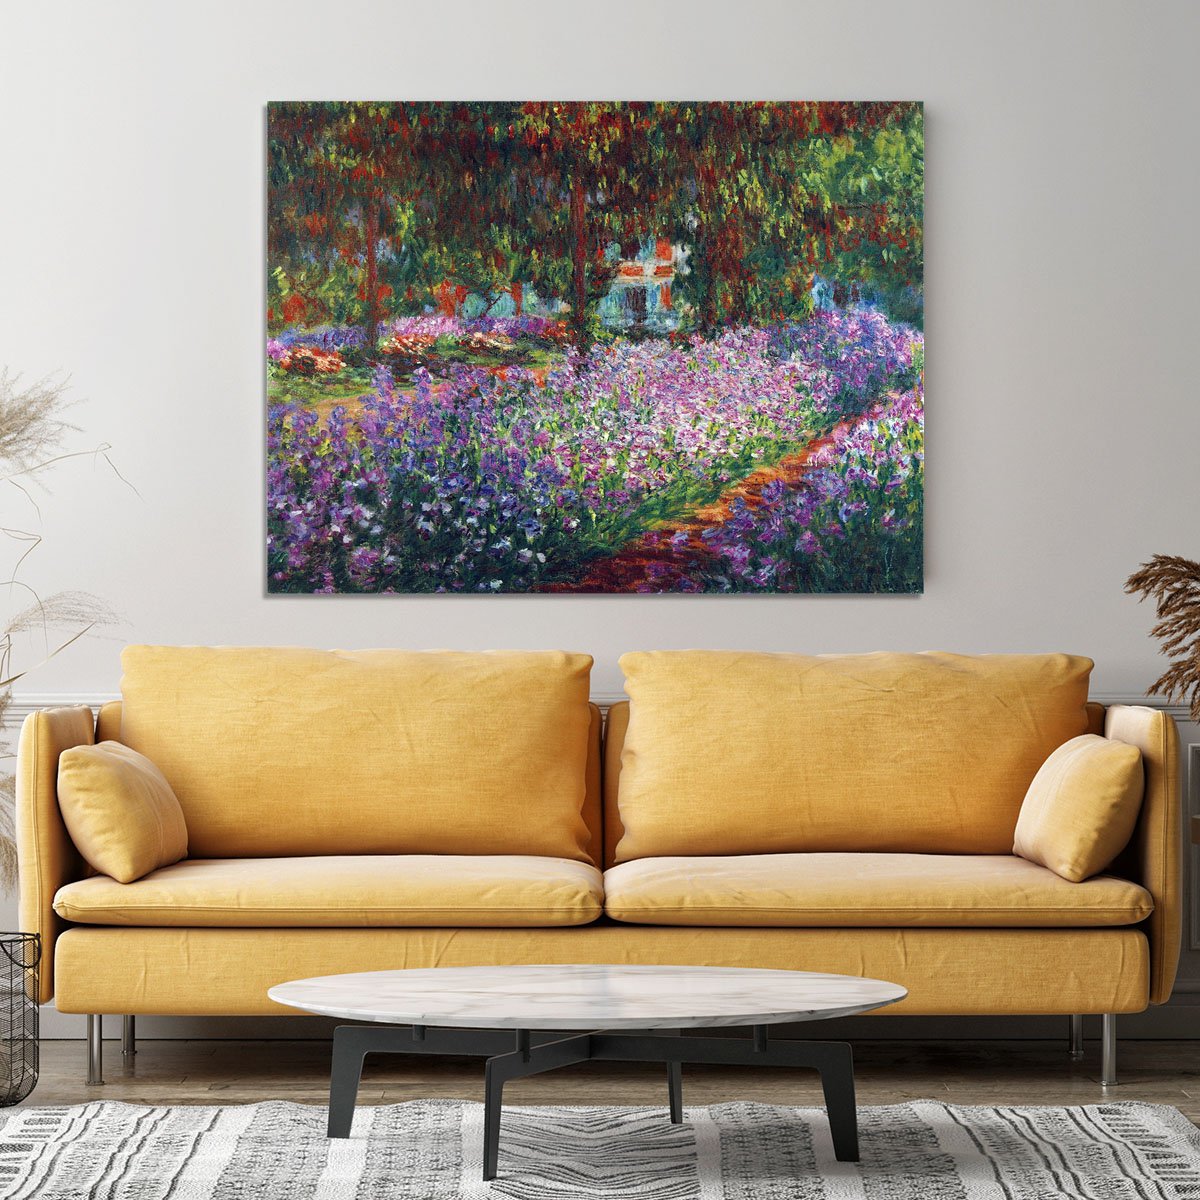 Monet's garden in Giverny by Monet Canvas Print or Poster